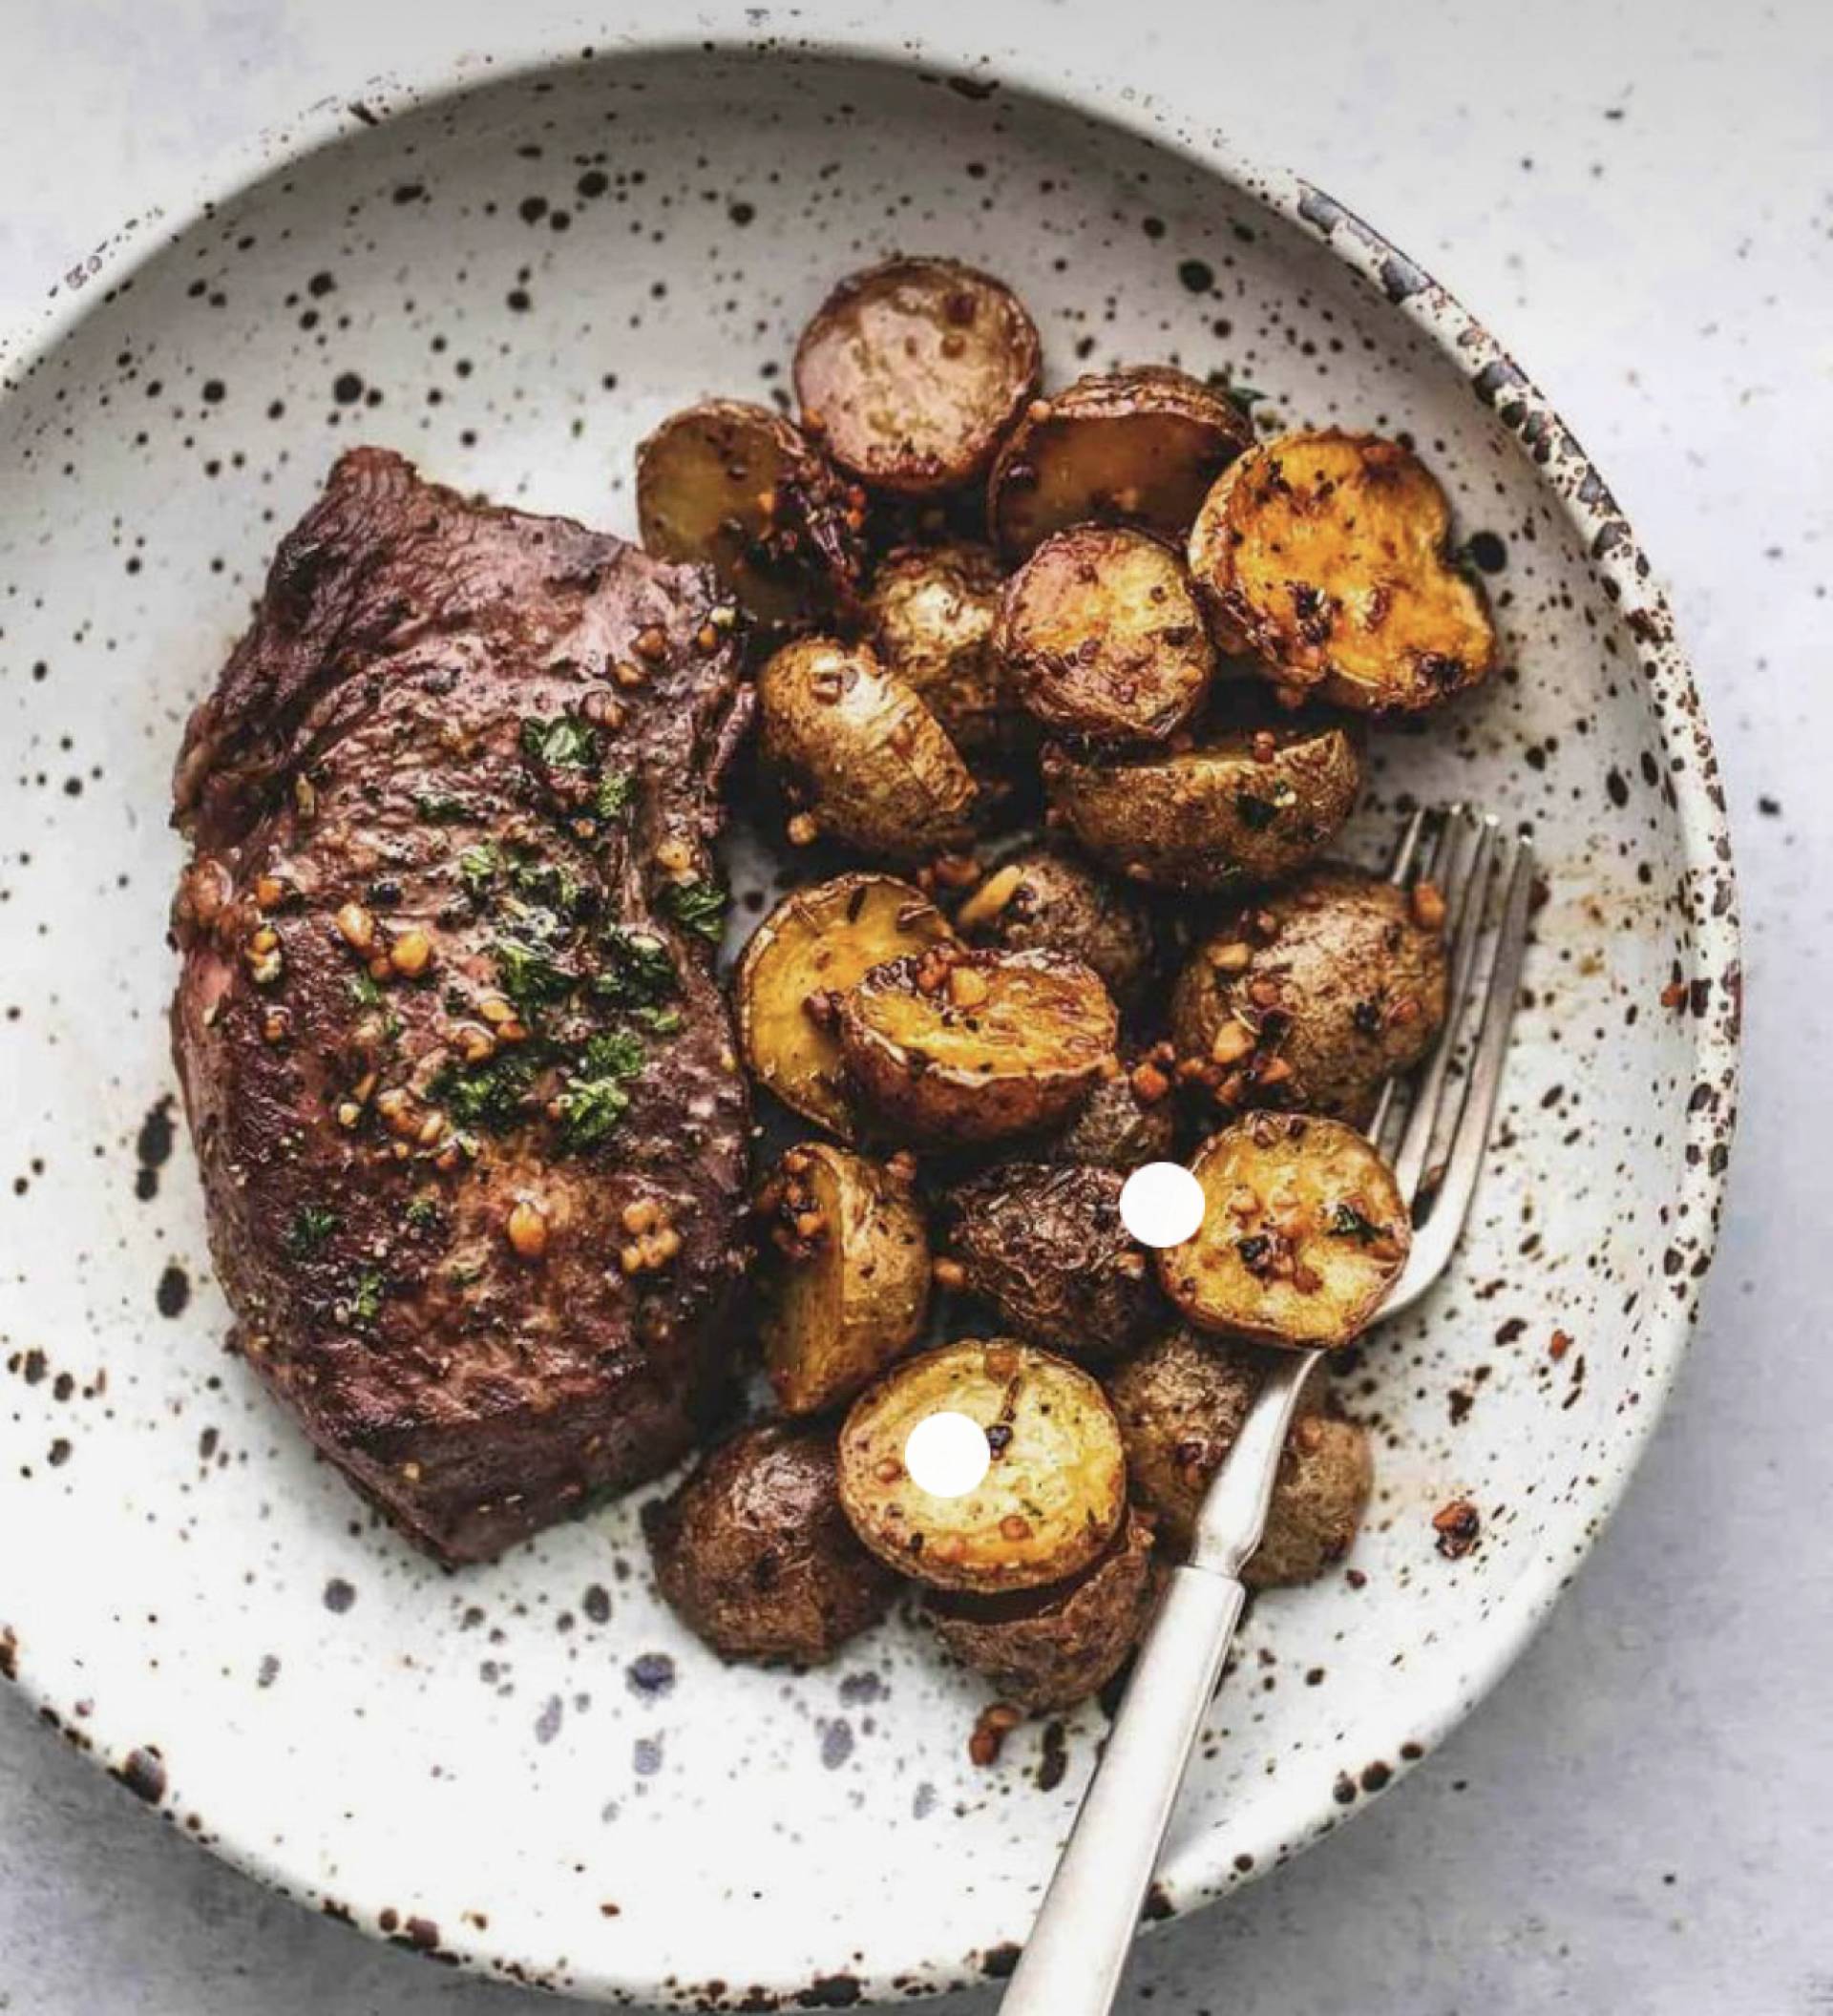 Grilled Steak, Roasted Potatoes, and Sautéed Squash Delight